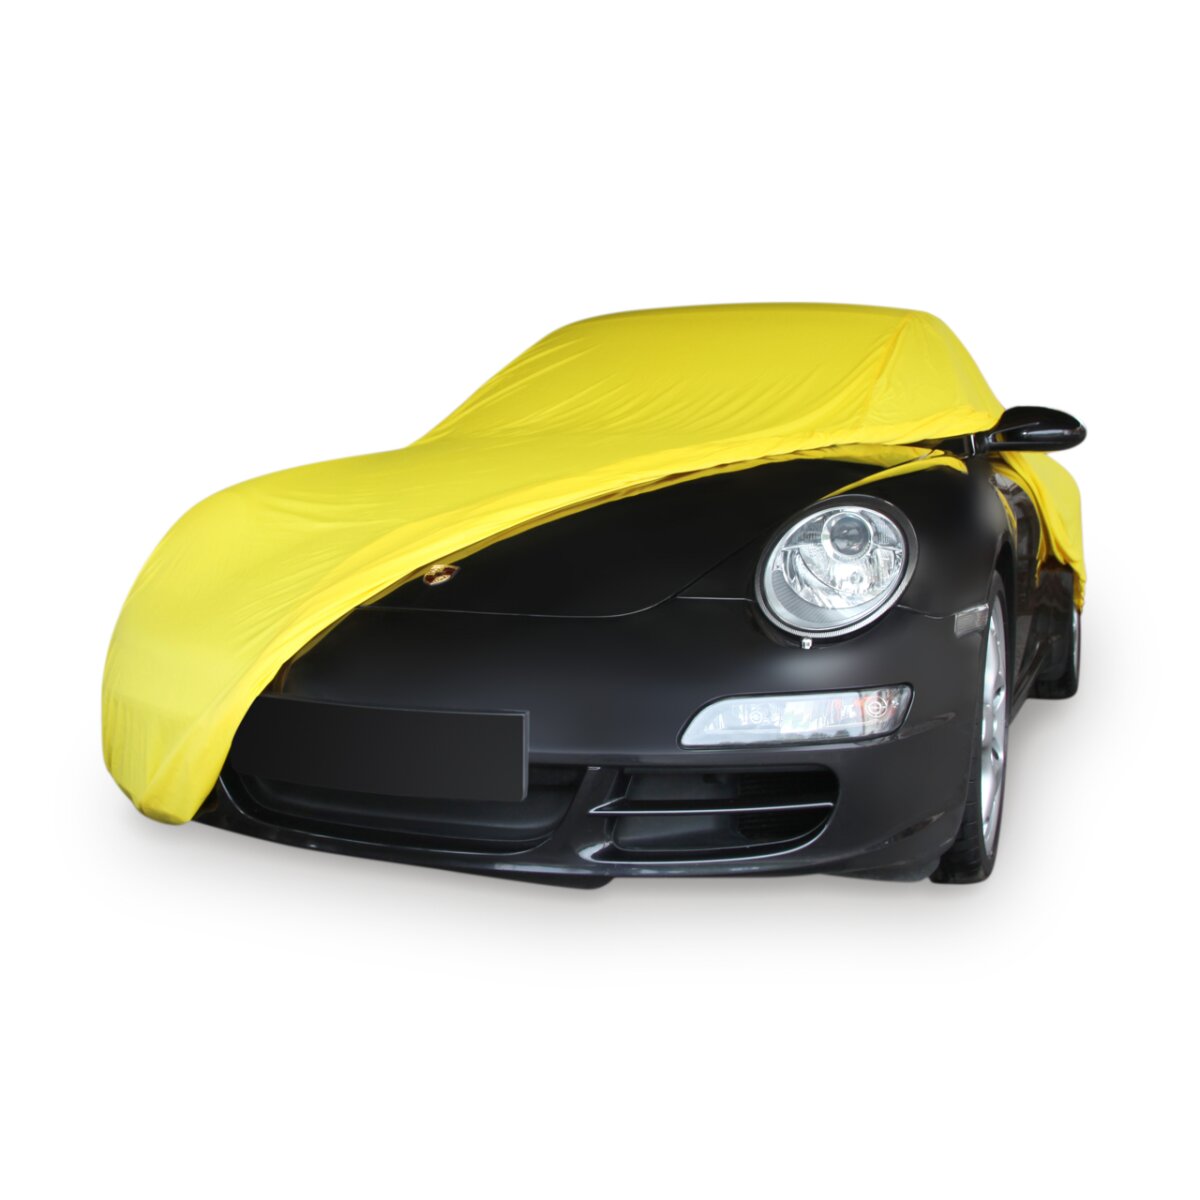 https://www.autoabdeckung.com/media/image/product/11443/lg/autoabdeckung-soft-indoor-car-cover-fuer-audi-a3-8p_3.jpg